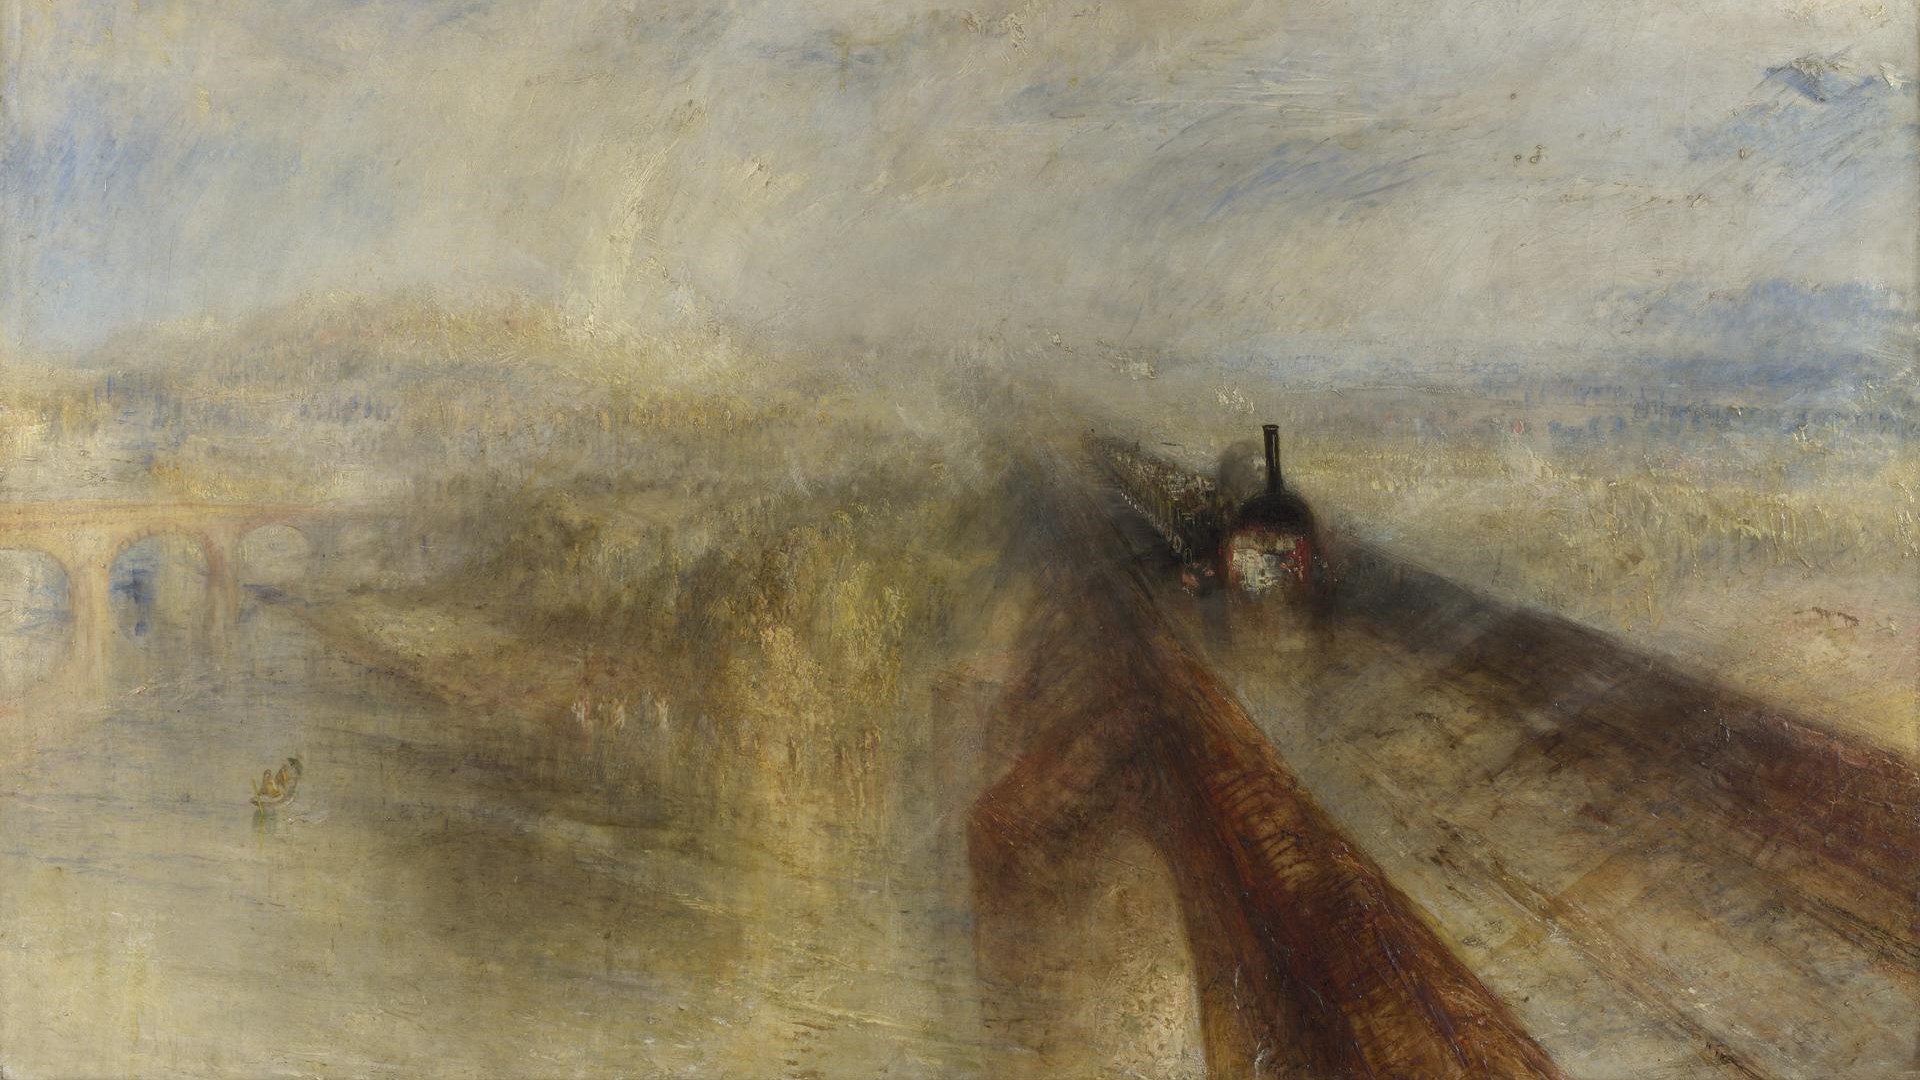 Joseph Mallord William Turner. Rain, Steam, and Speed Great Western Railway. NG538. National Gallery, London